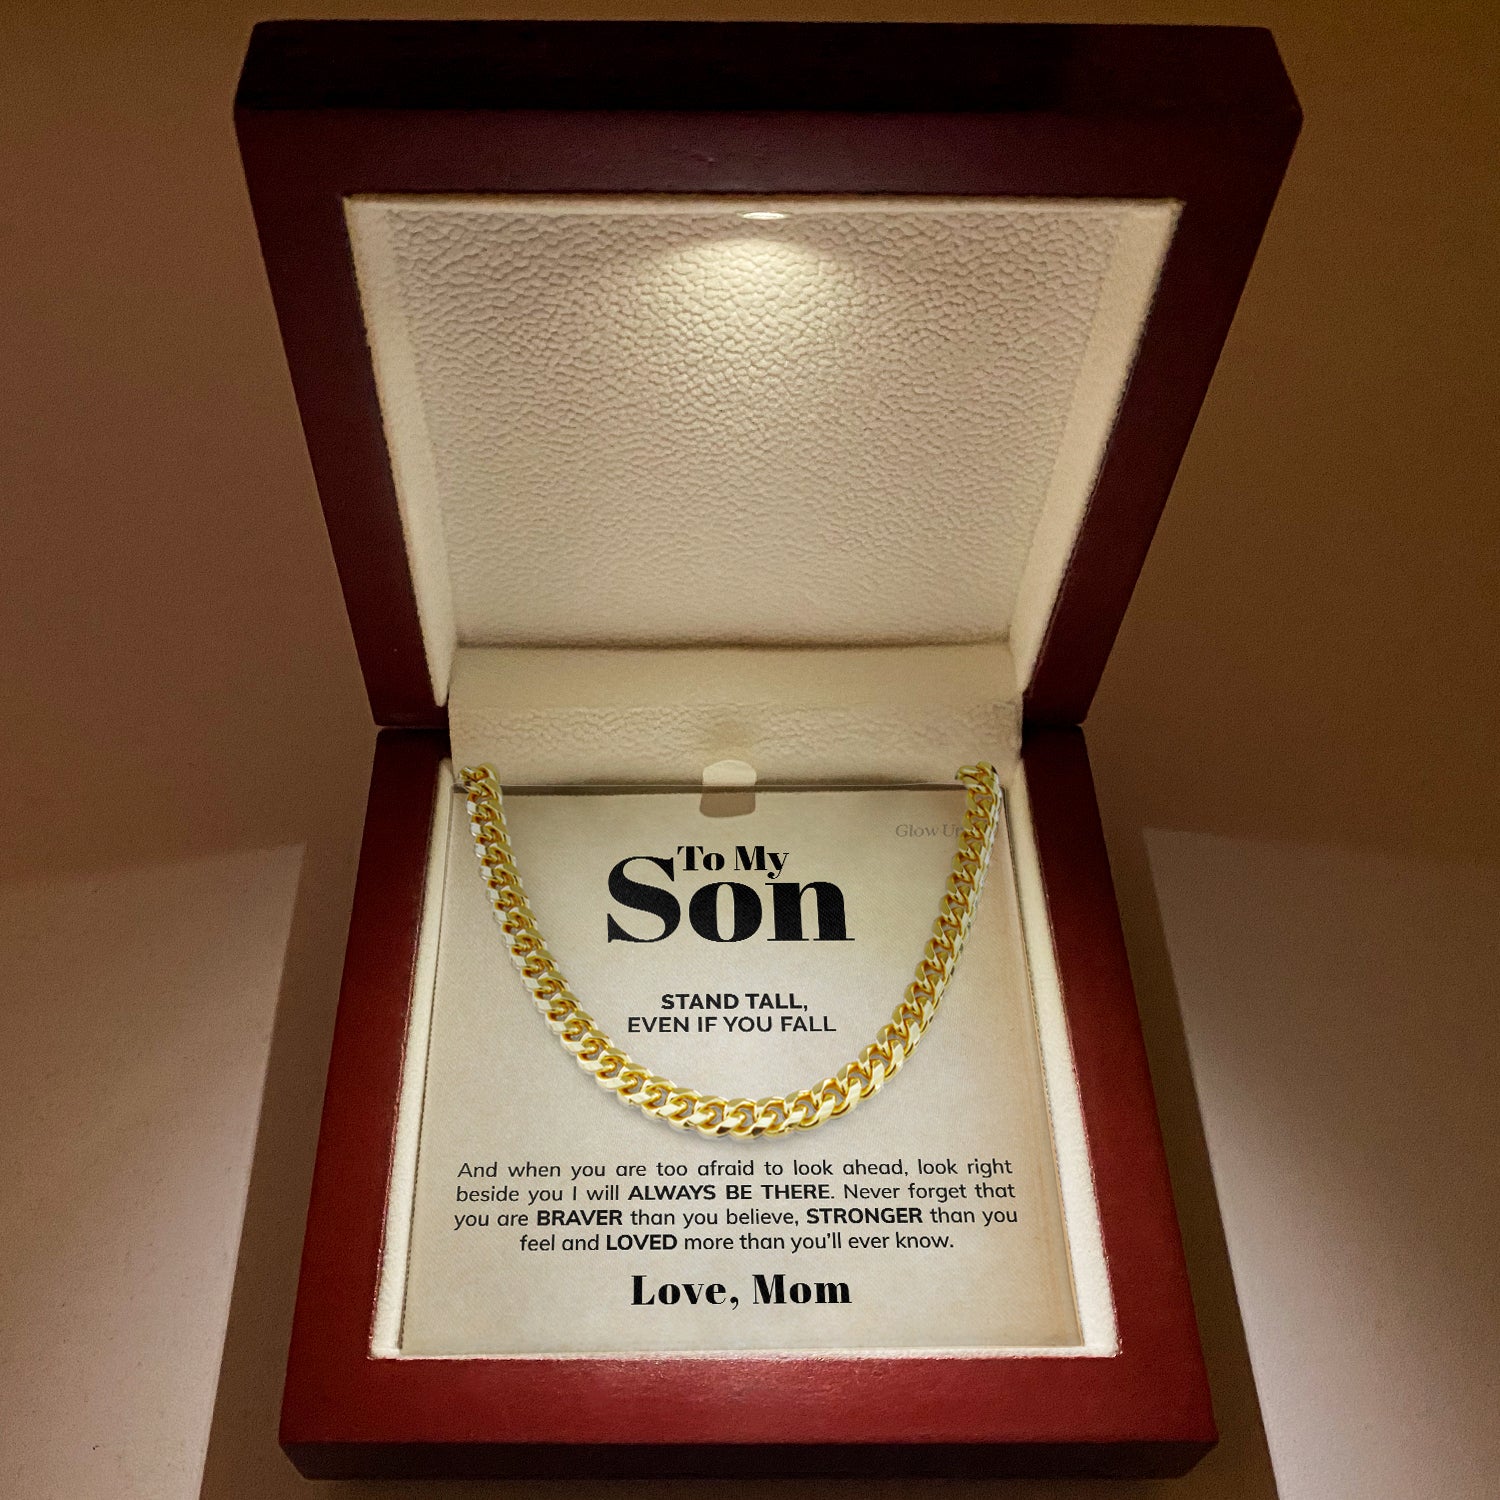 ShineOn Fulfillment Jewelry 14K Yellow Gold Finish / Luxury LED Box To My Son - Loved more than you will ever know - Cuban Link Chain